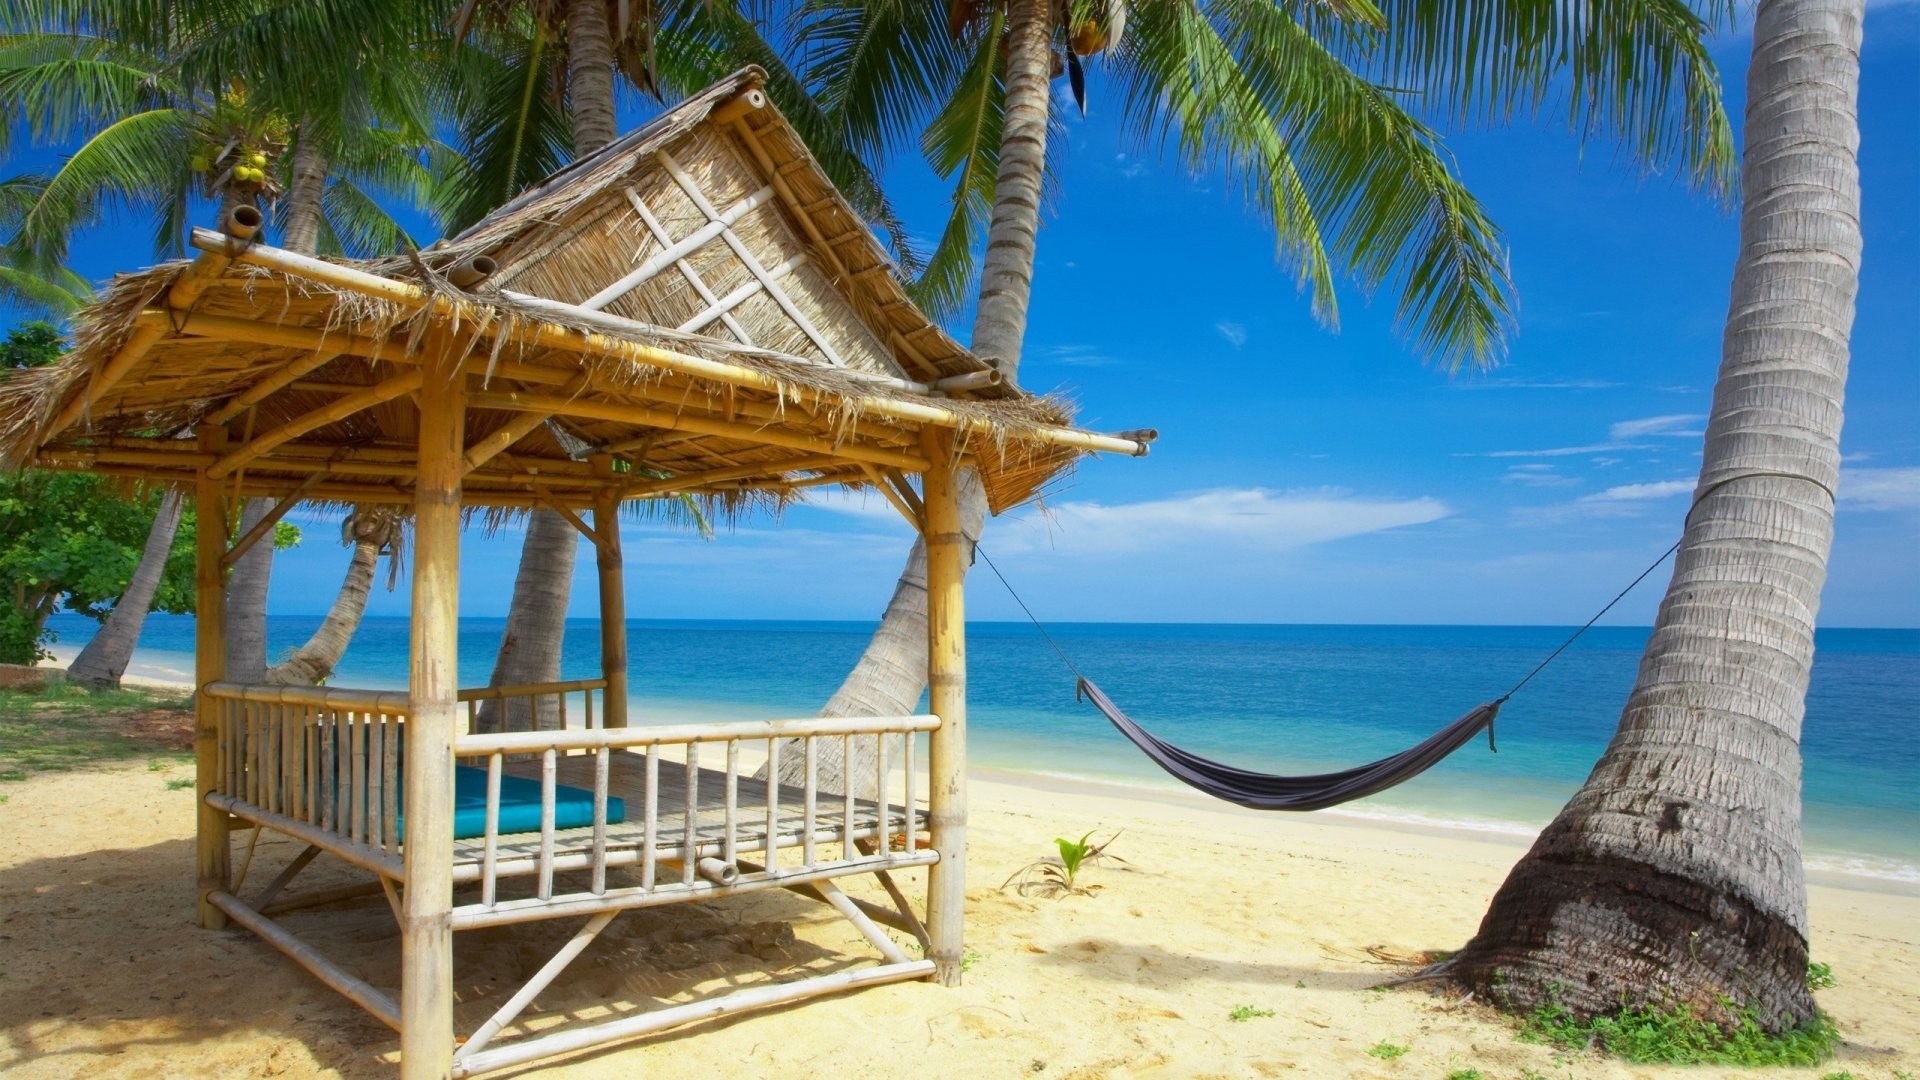 Free Beach Screensavers And Wallpapers Beach Hut photos Refresh Your 1920x1080